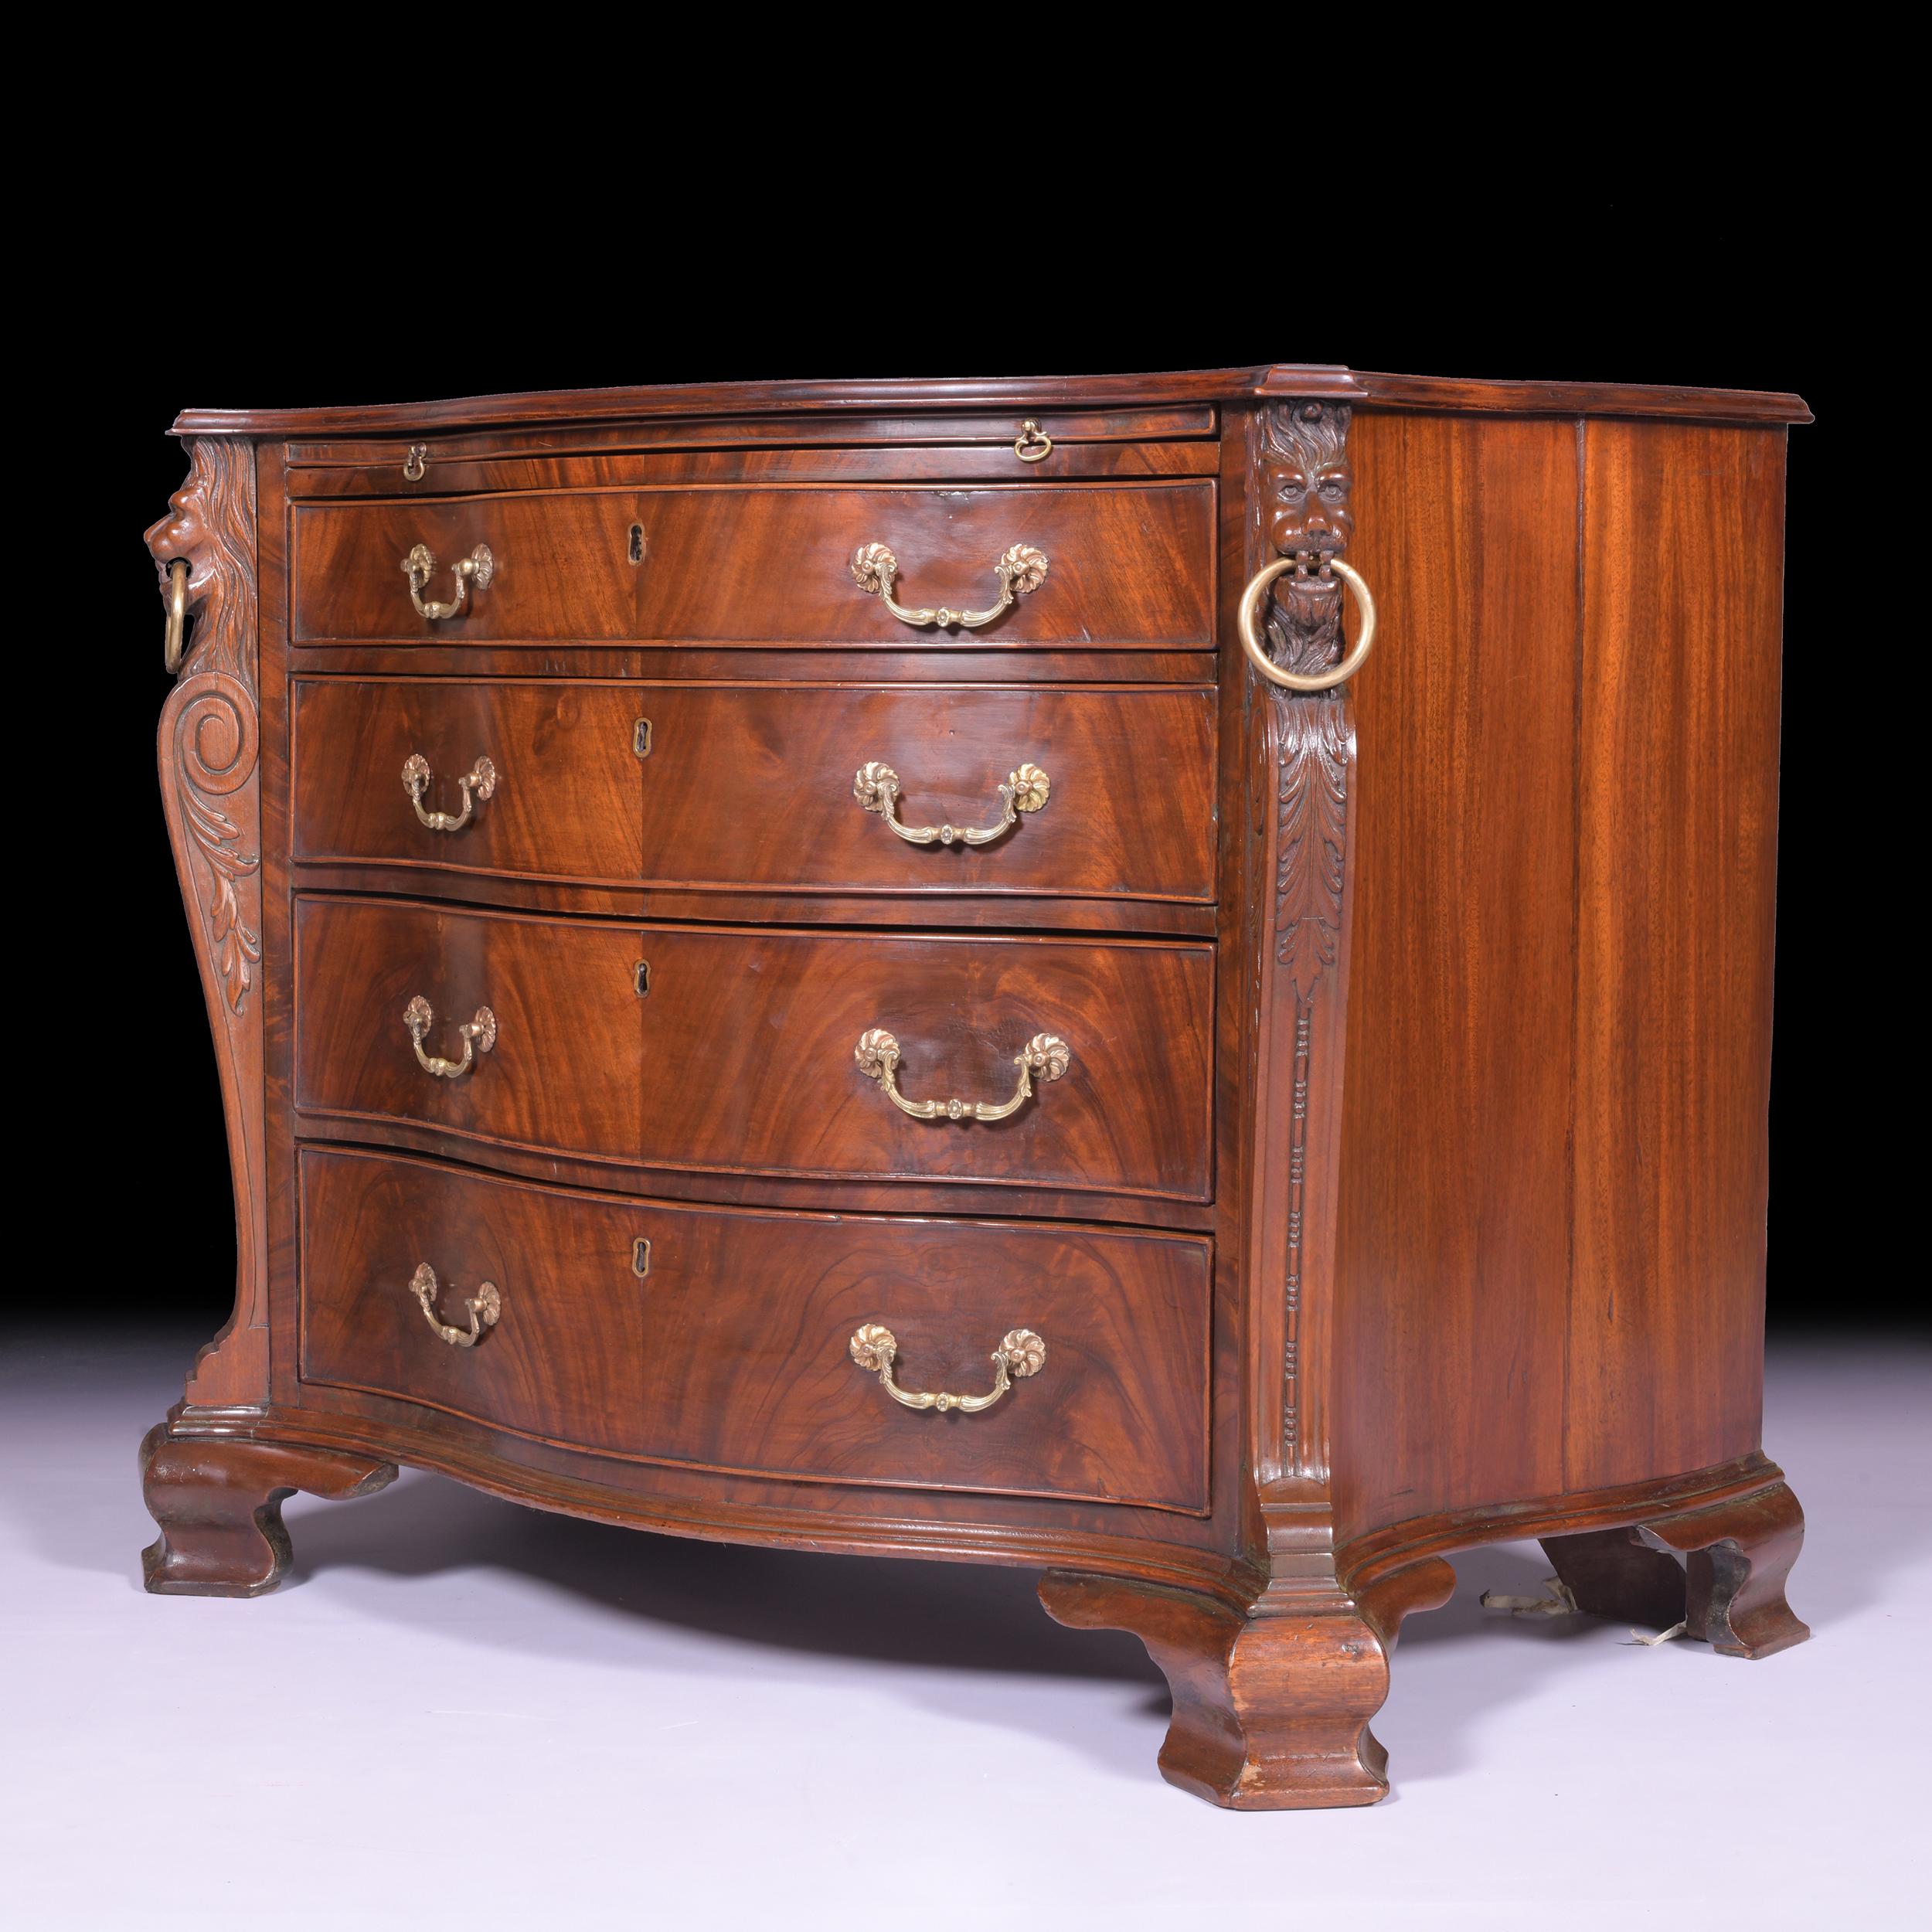 A superb George II style mahogany serpentine shaped commode in the style of Thomas Chippendale, with a moulded serpentine top above a slide and four long graduated drawers between scroll and mask head stiles, on ogee bracket feet.

Circa